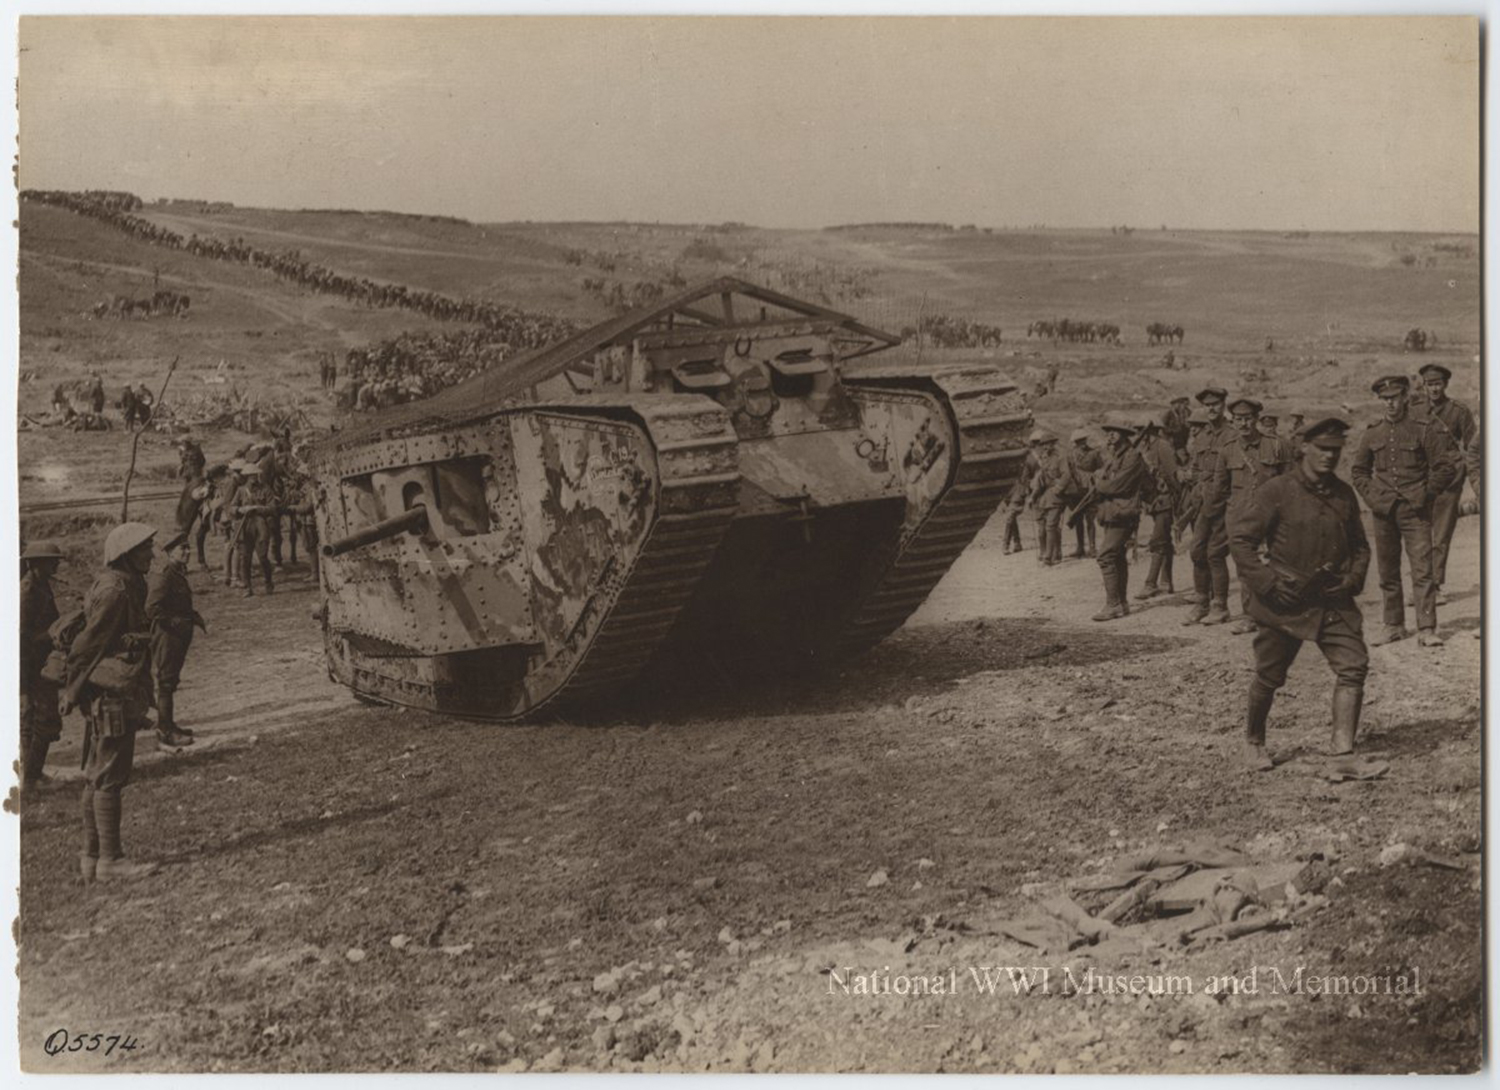 A tank in Chimpanzee Valley on September 15, 1916 during the Battle of the Somme in World War I